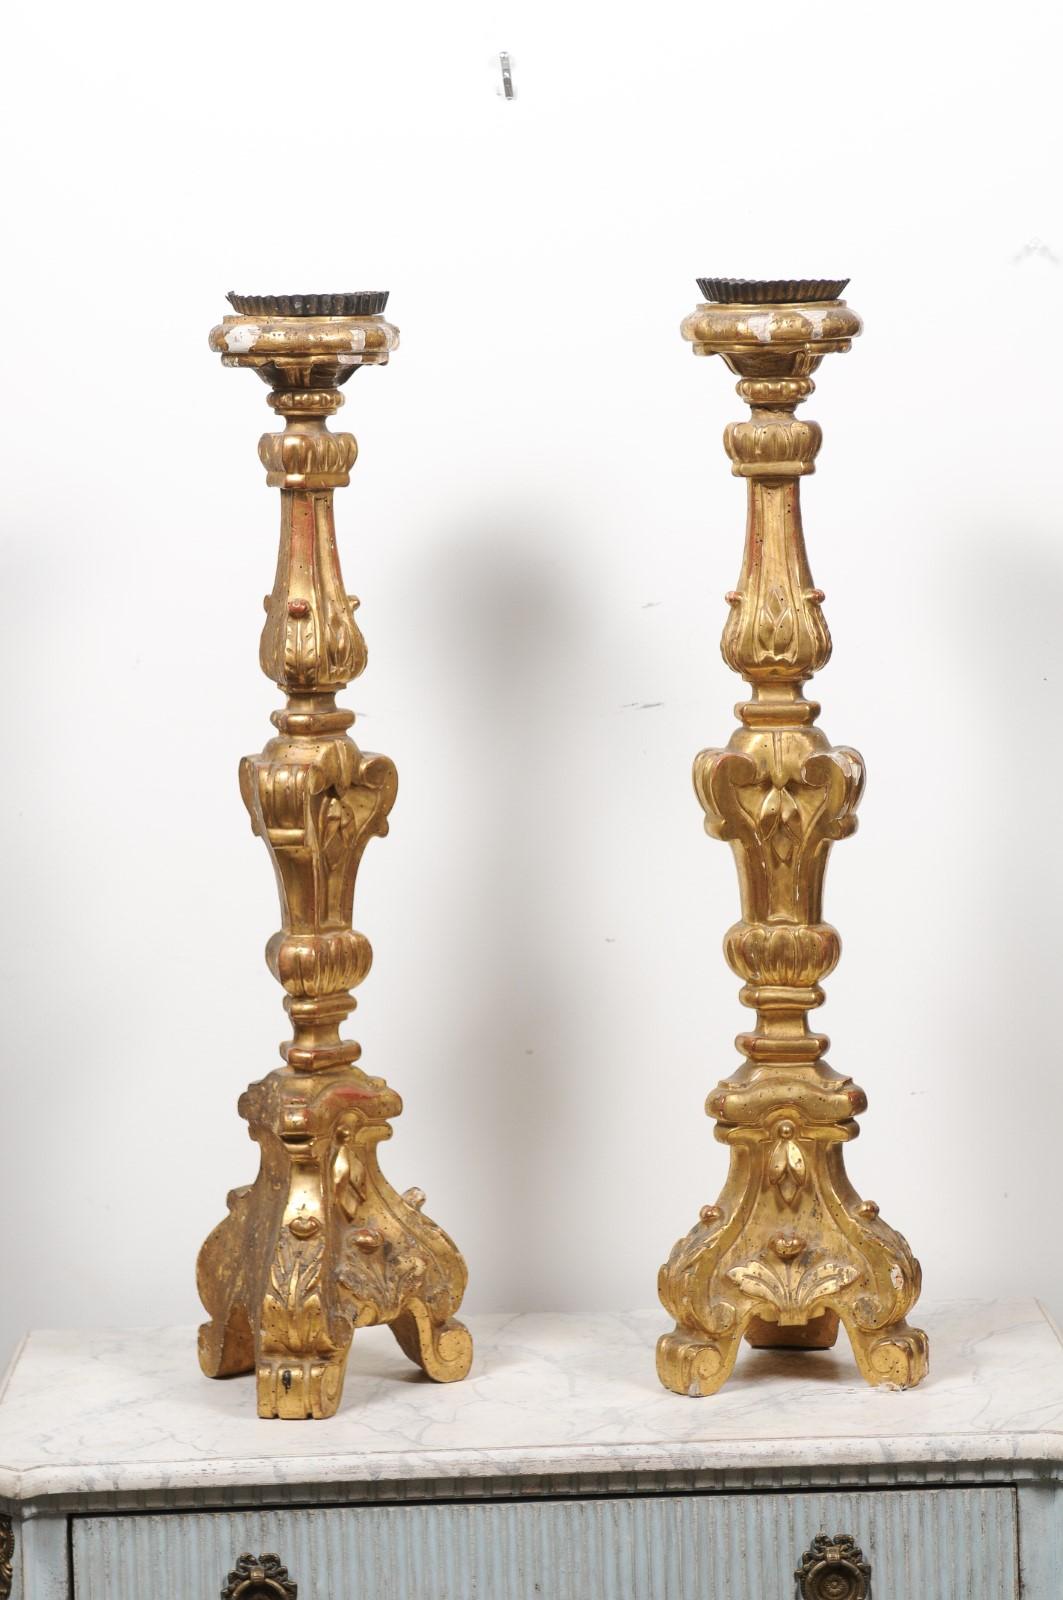 A pair of French giltwood candlesticks from the 19th century, with carved volutes and foliage. Created in France during the 19th century, each of this pair of candlesticks features a delicate décor showcasing foliage and volutes presenting a